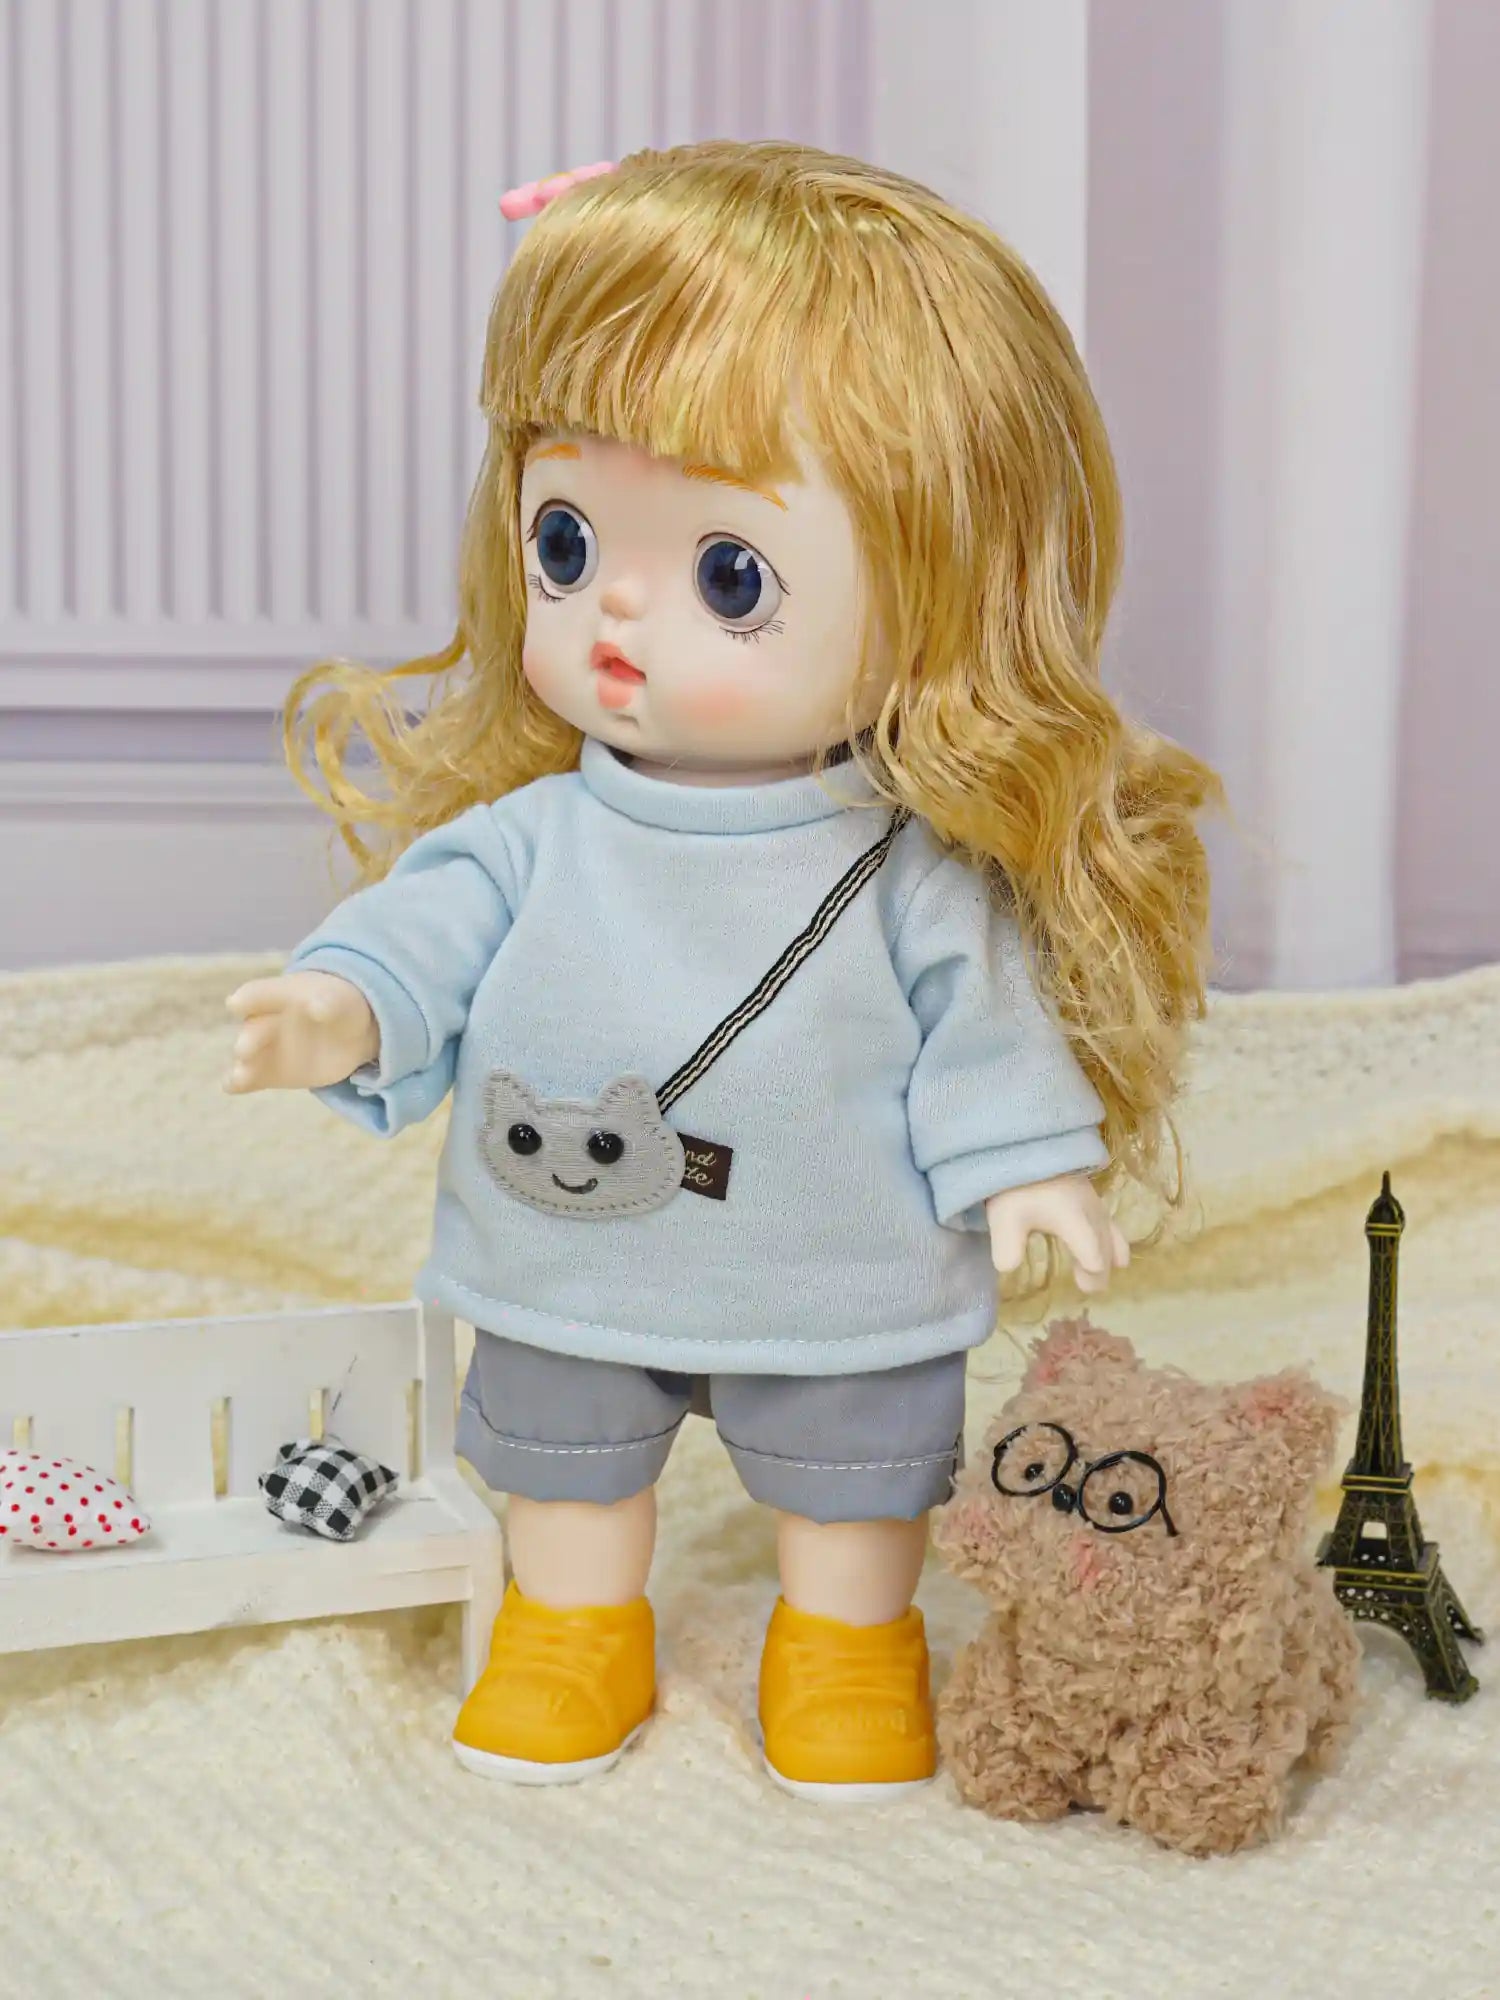 A little doll with wavy hair and a playful expression, wearing casual play clothes and standing near a soft, bespectacled toy.